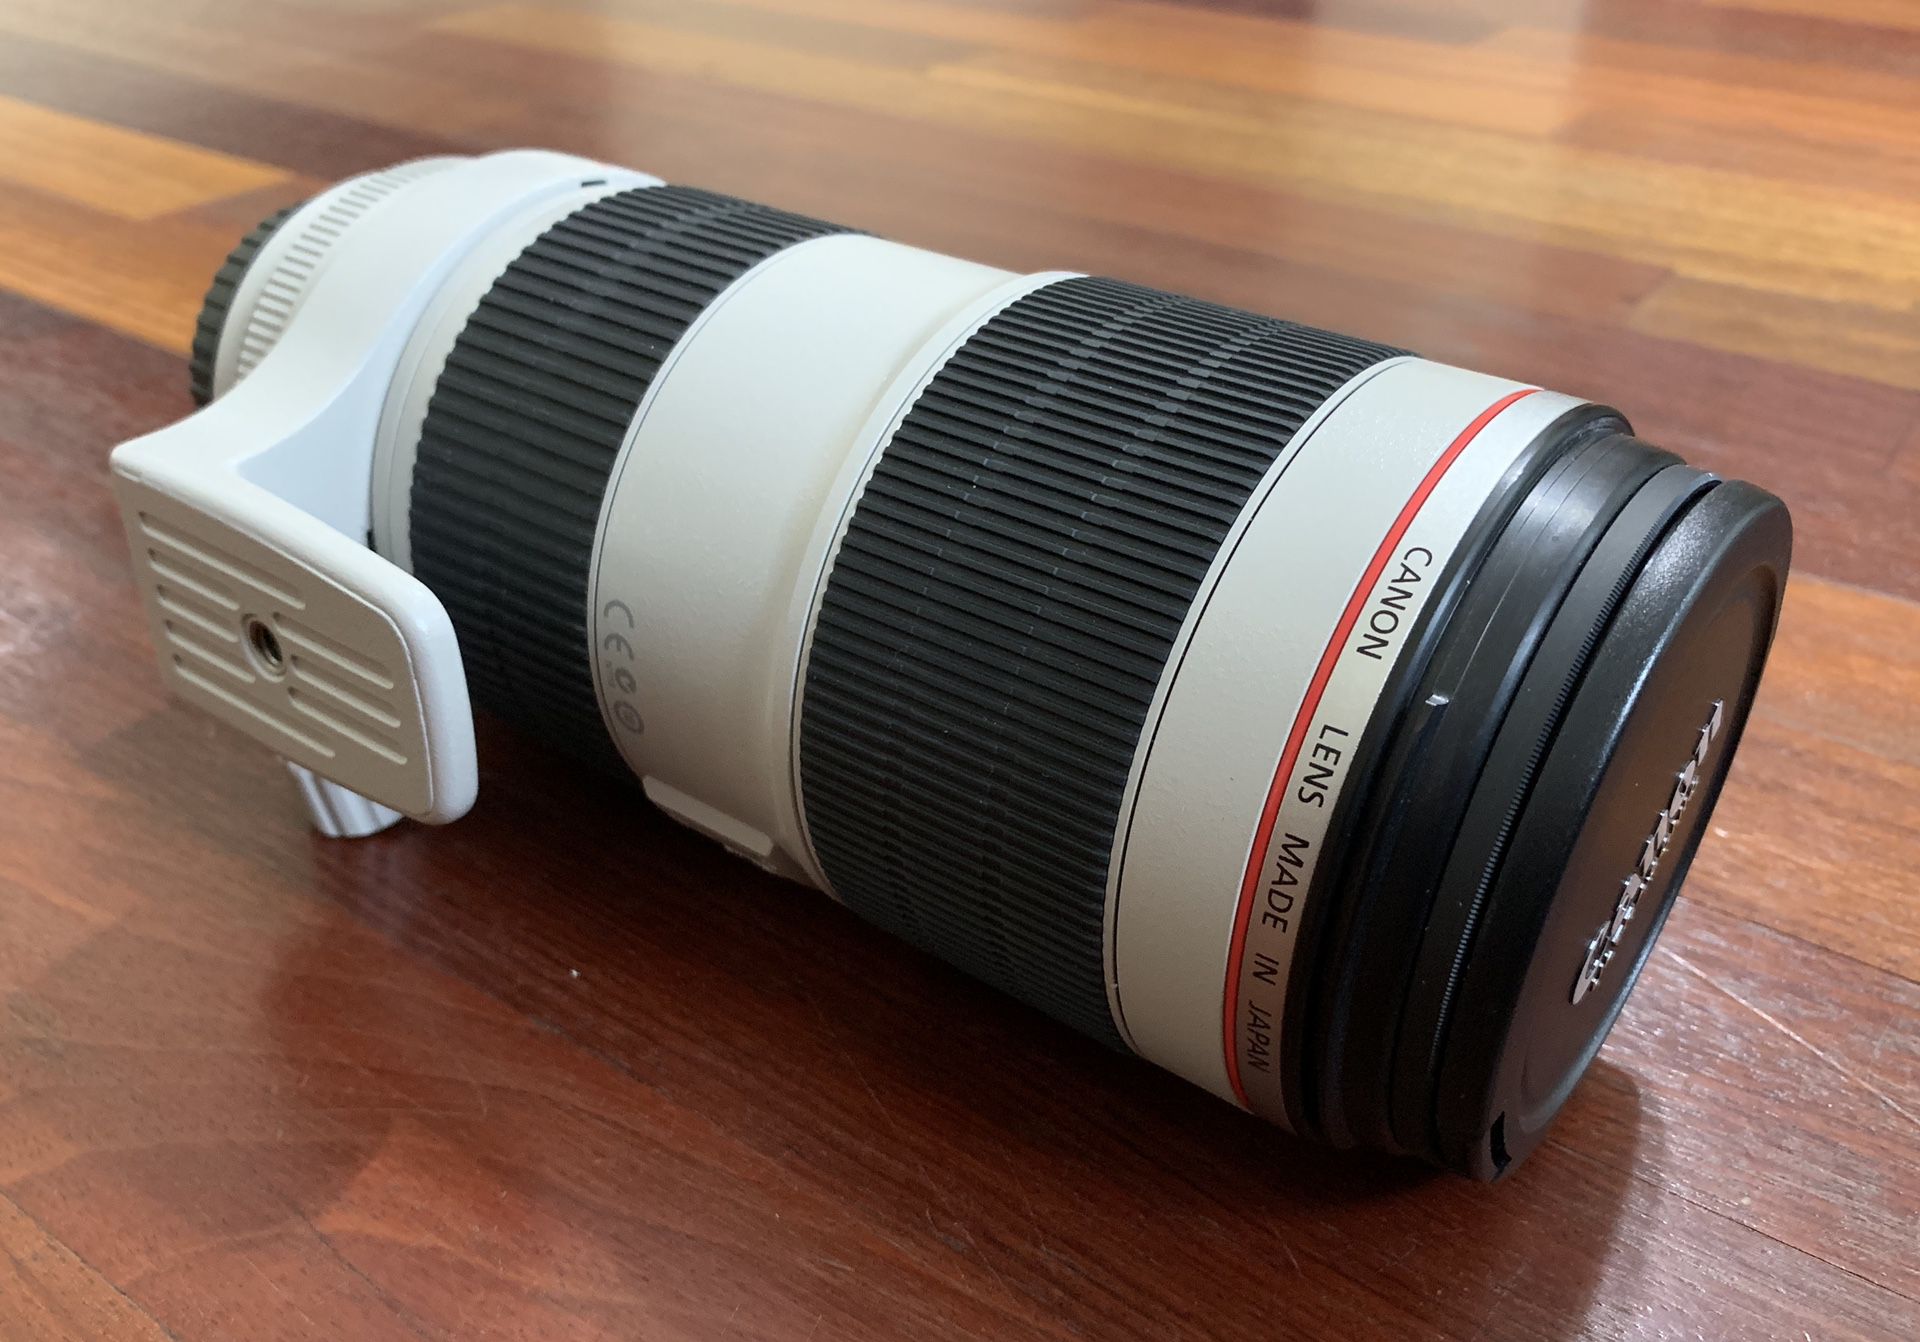 Canon EF 70-200mm f/2.8L IS II USM Telephoto zoom lens